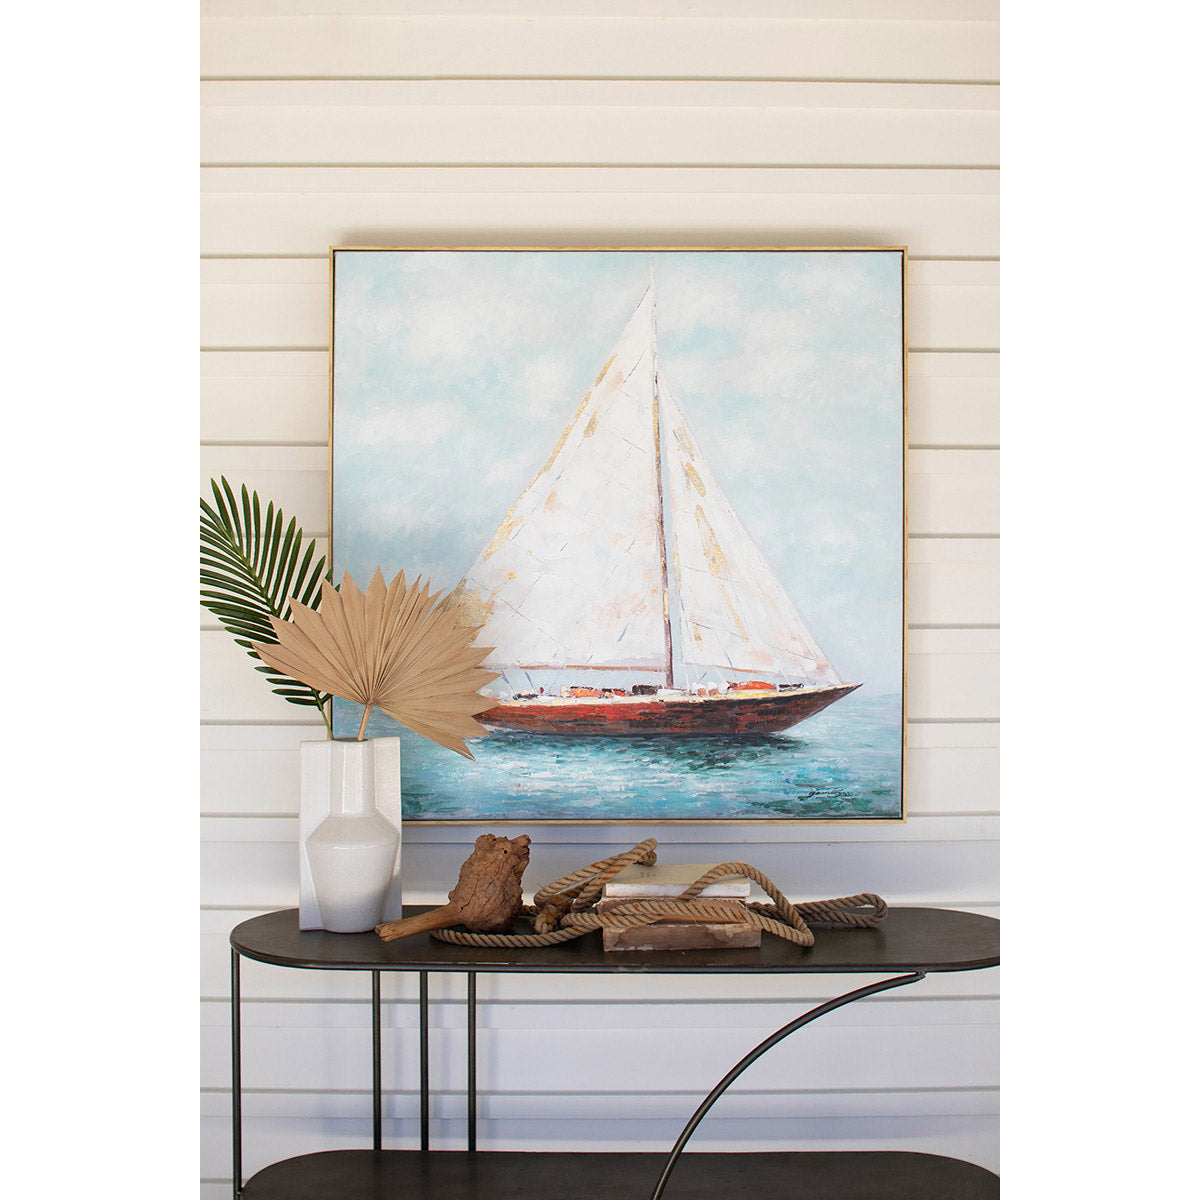 The Sailboat Oil Painting